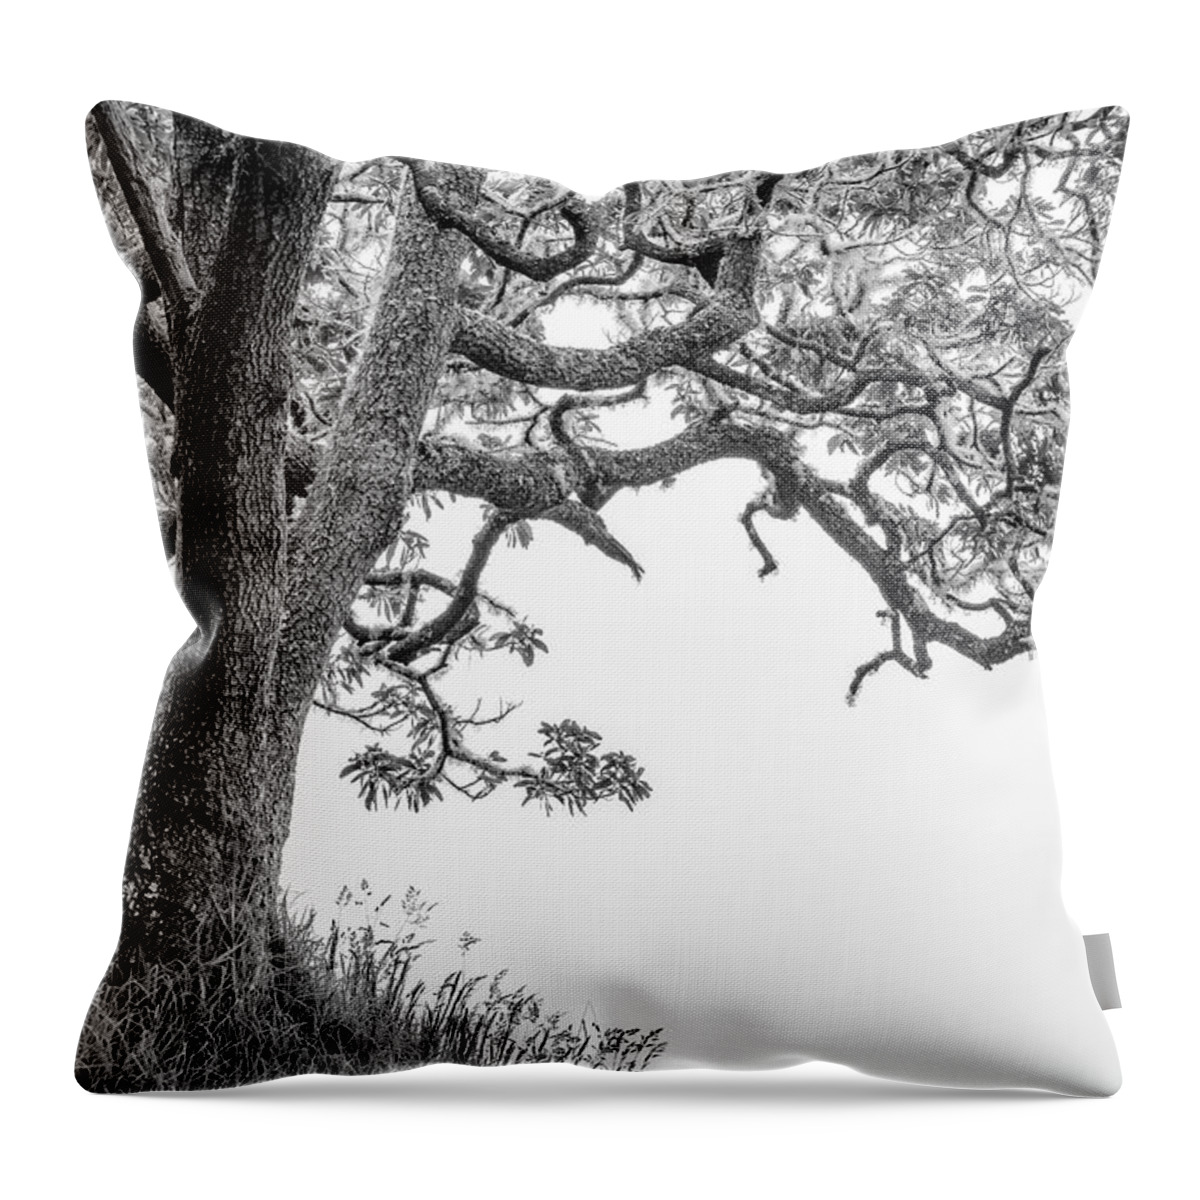 Mossy Tree Throw Pillow featuring the photograph Mossy Tree by Christopher Johnson